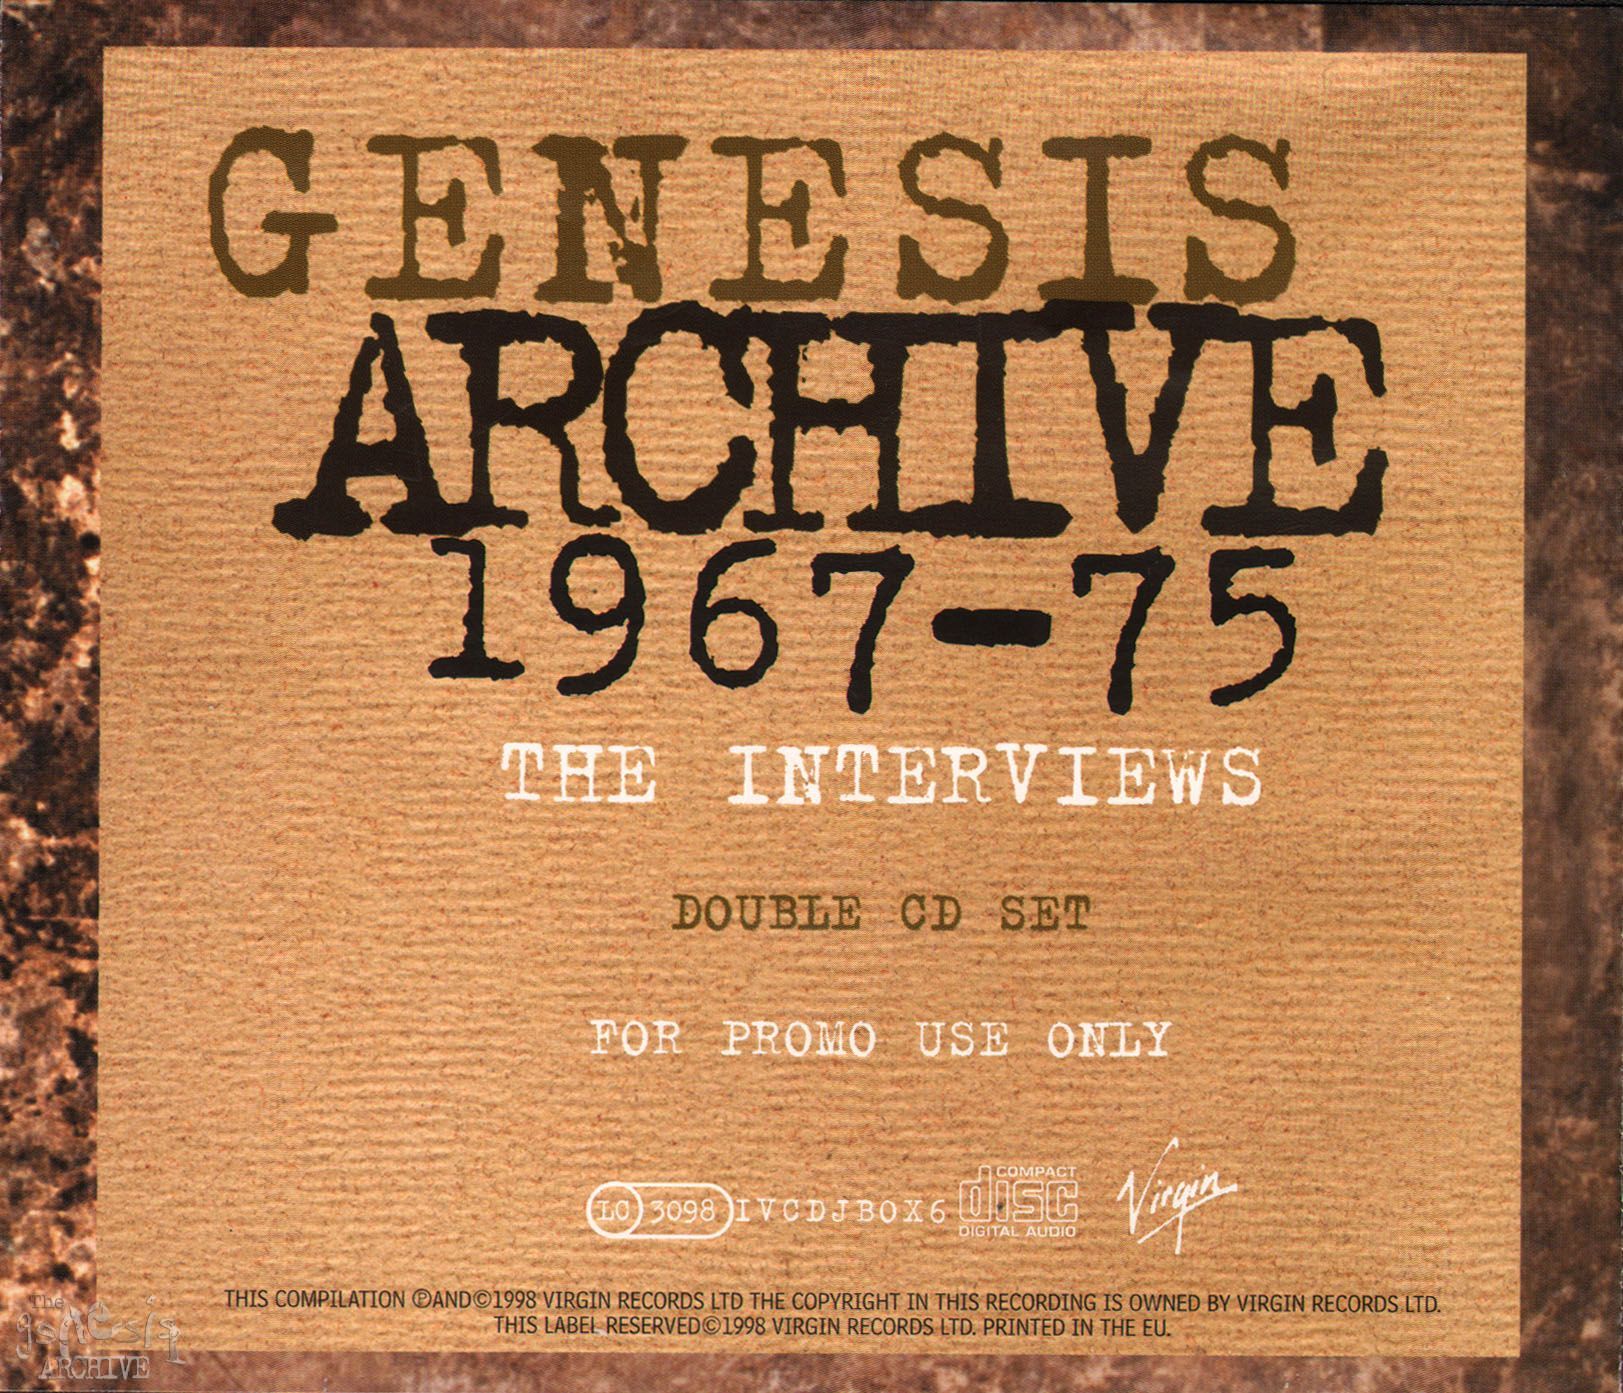 Genesis Archive One 1967 to 1975 Interview Double CD.